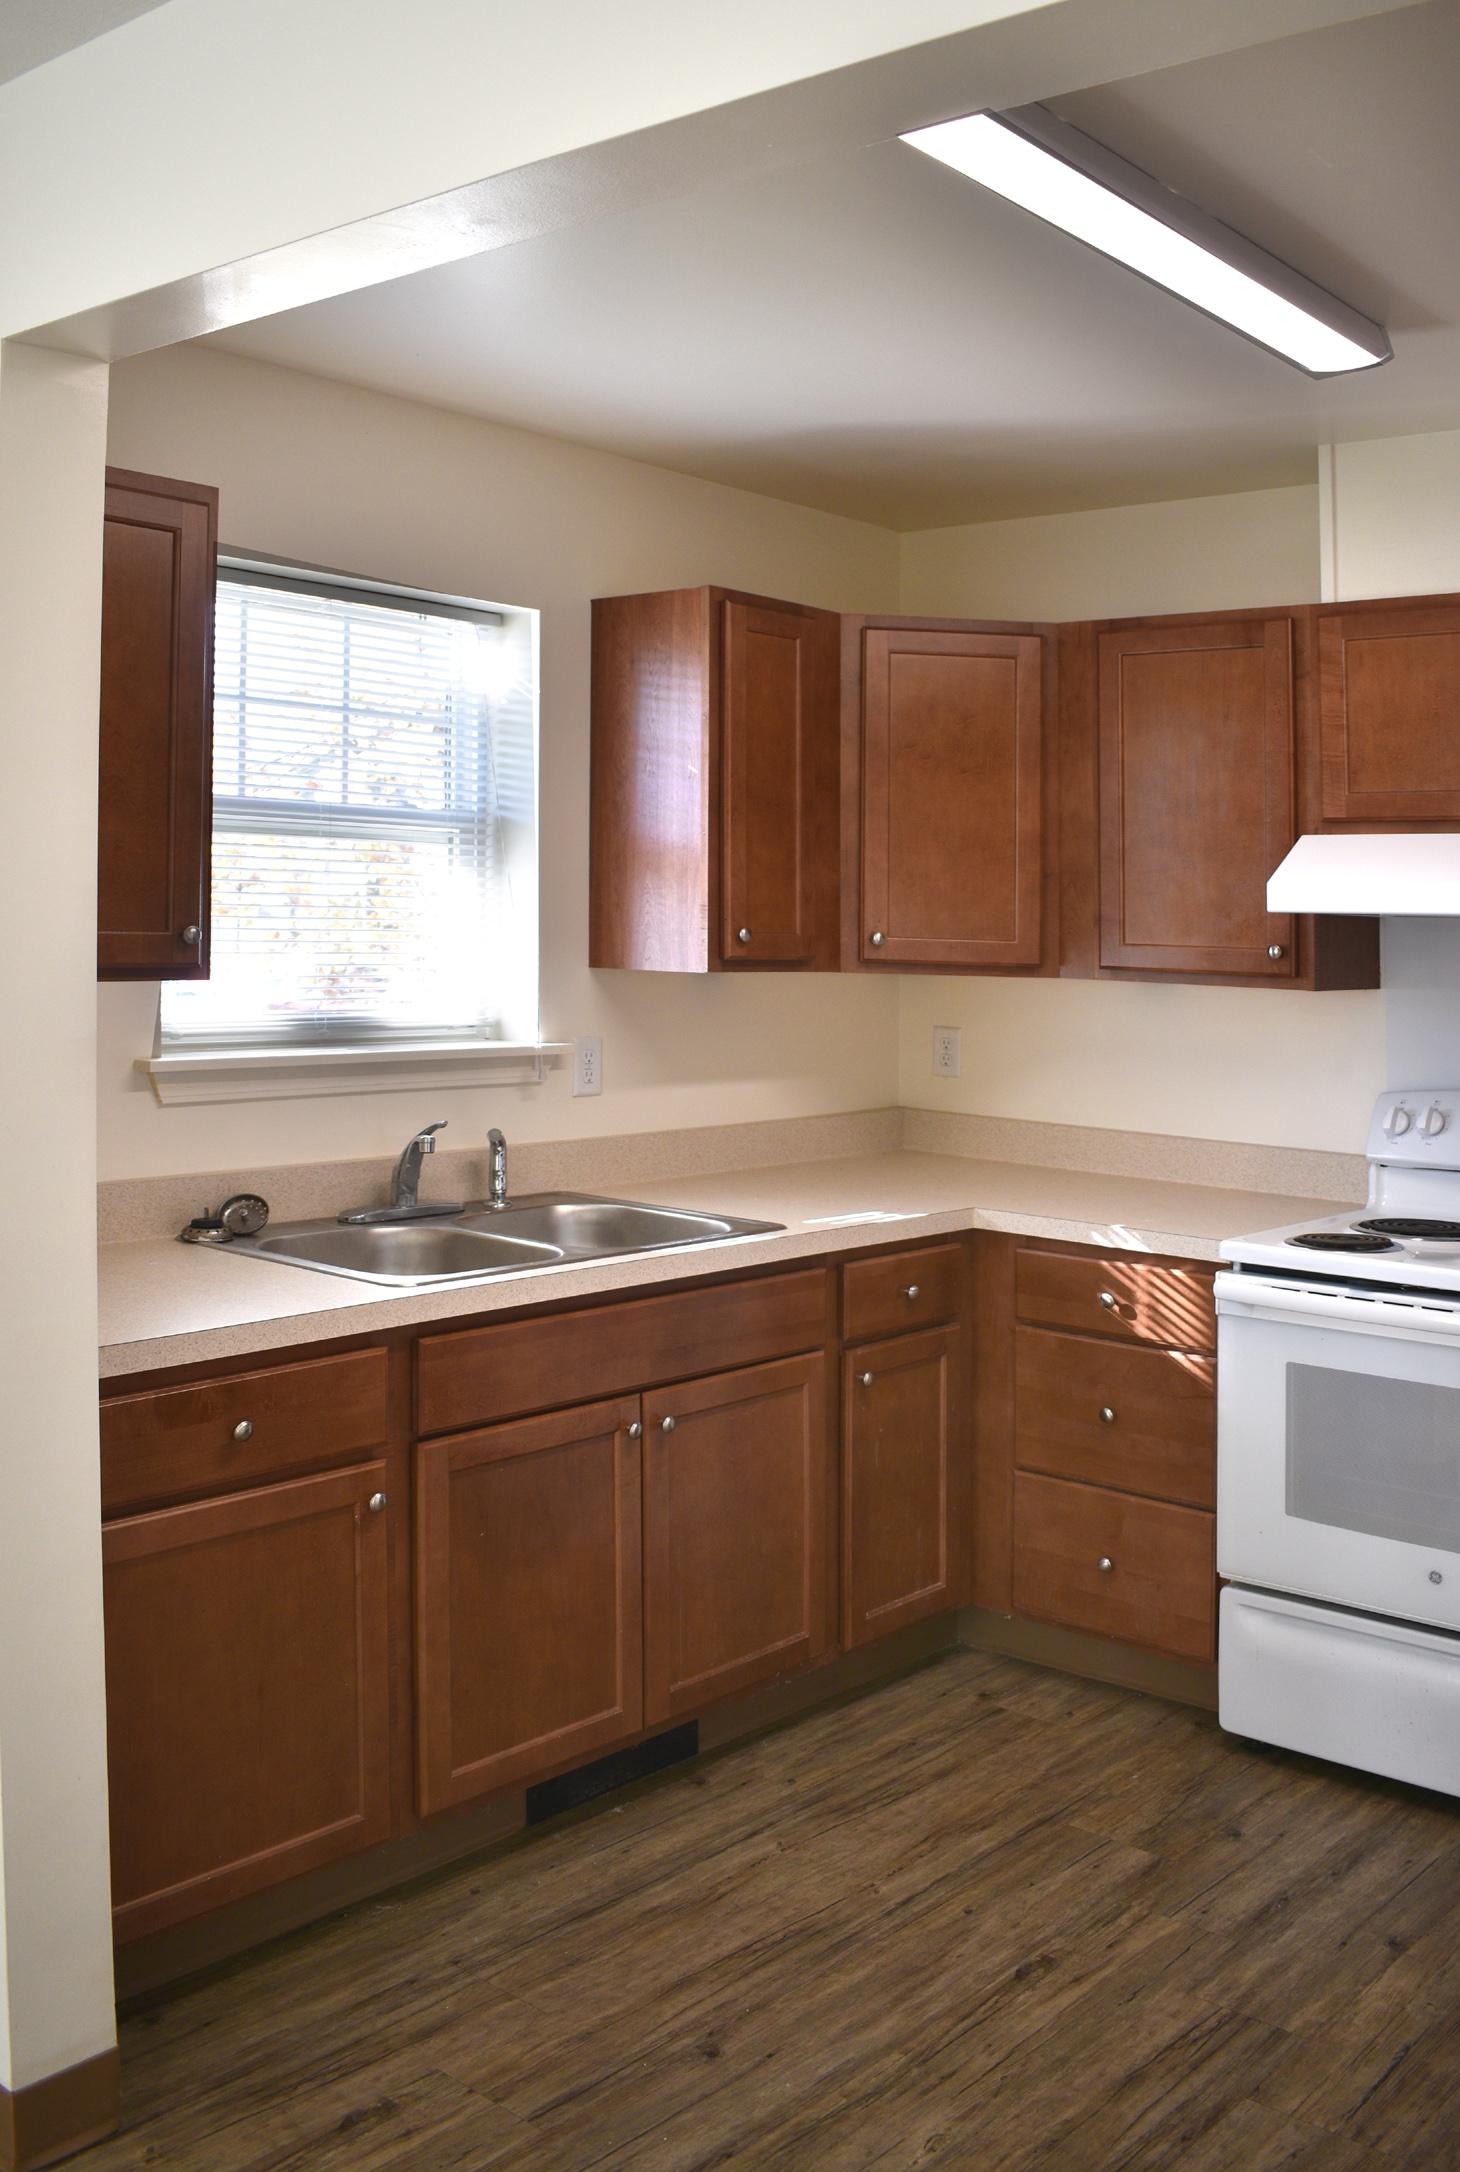 property management company client list syracuse ny kitchen image of island hollow townhomes